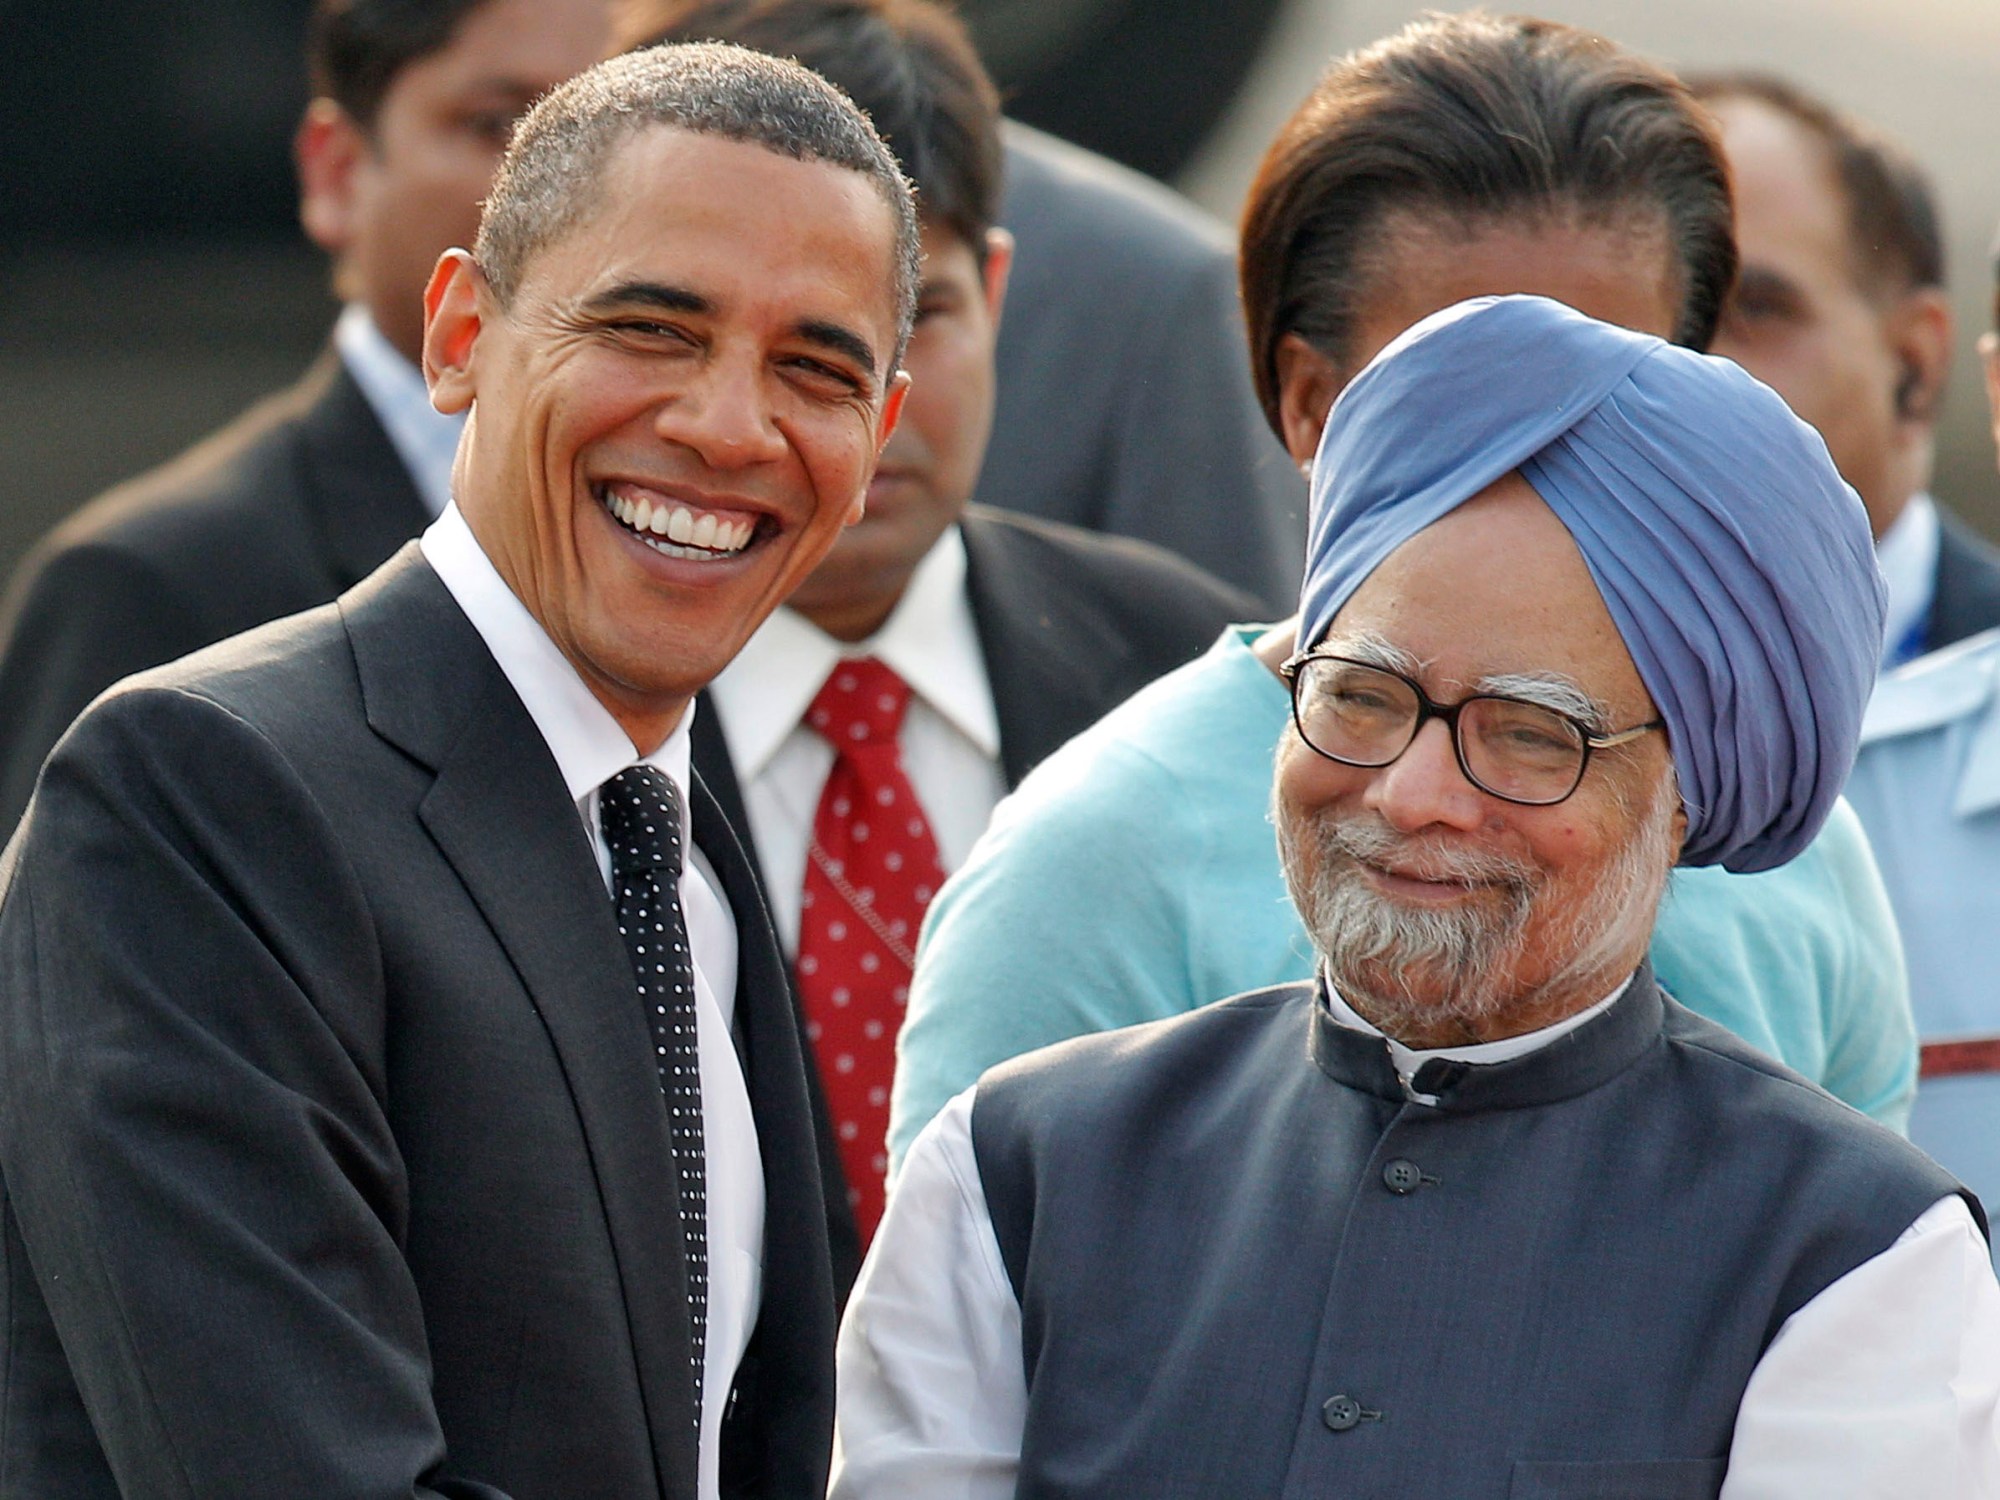 President Barack Obama is greeted by Indian Prime Minister Manmohan Singh at the airport in New Delhi, India. (AP/Gurinder Osan)